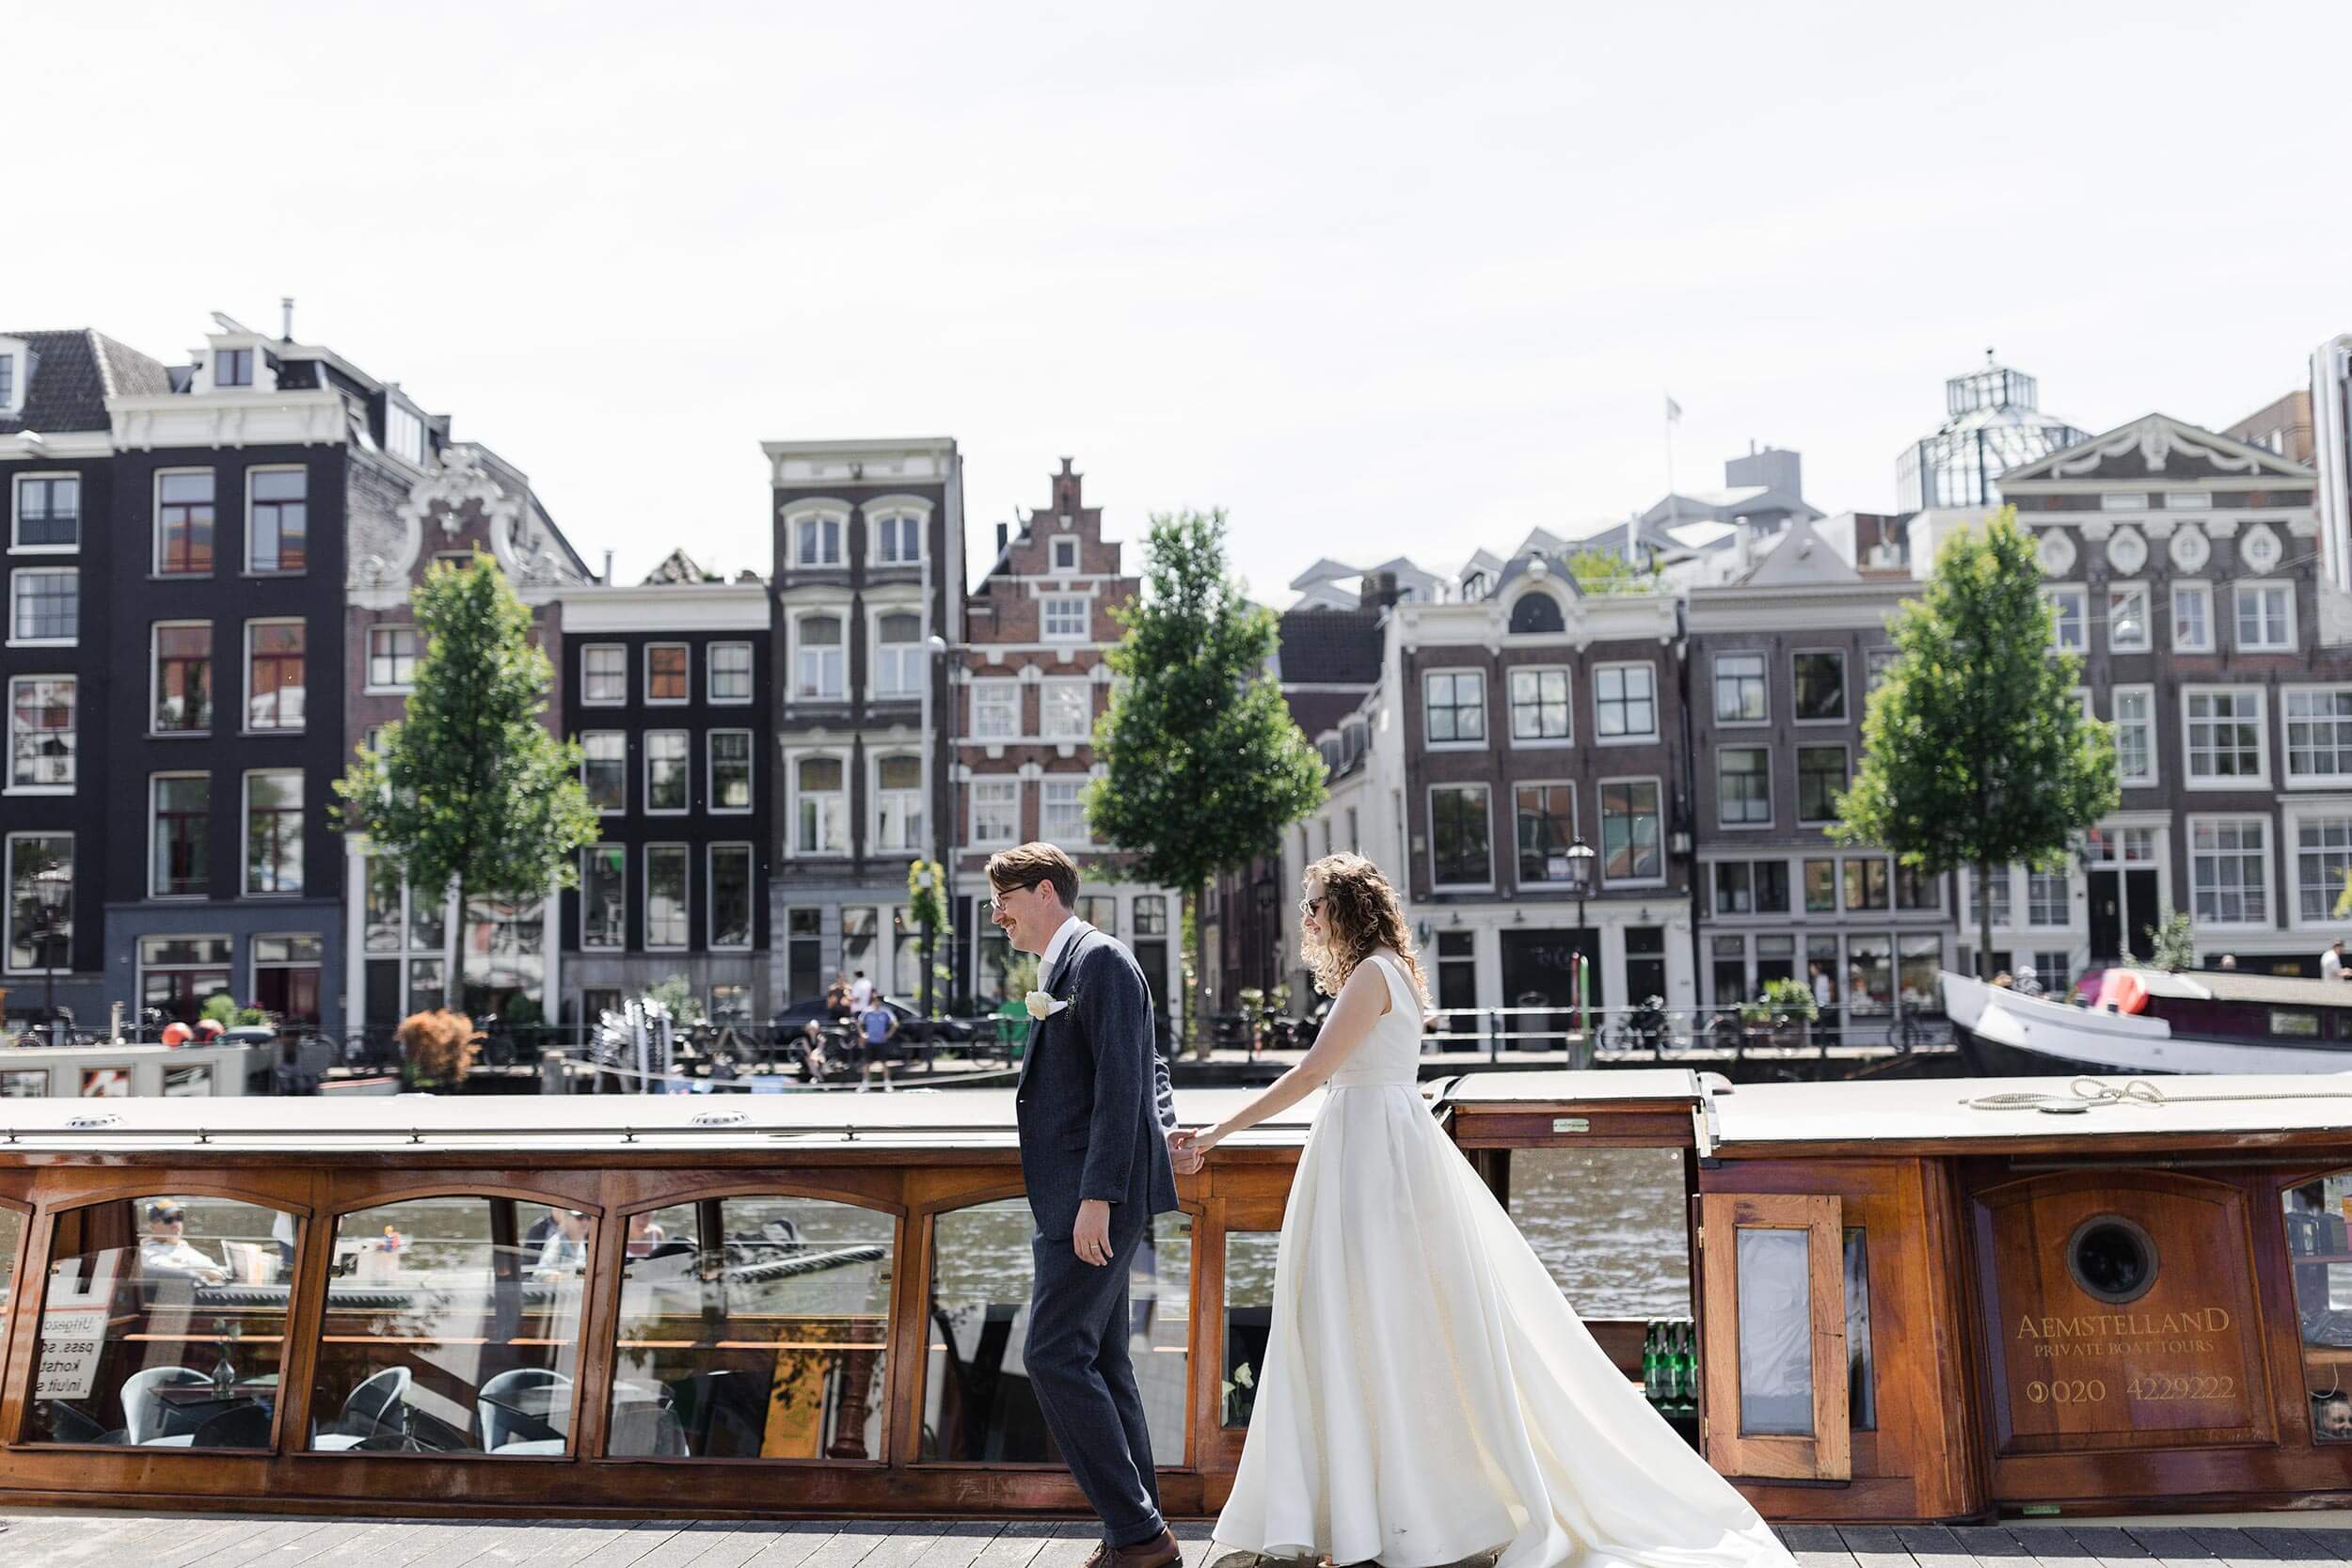 alt="Wedding of MJ & Matthew as they wait for the Canal Boat to pick them up on the River Amstel"